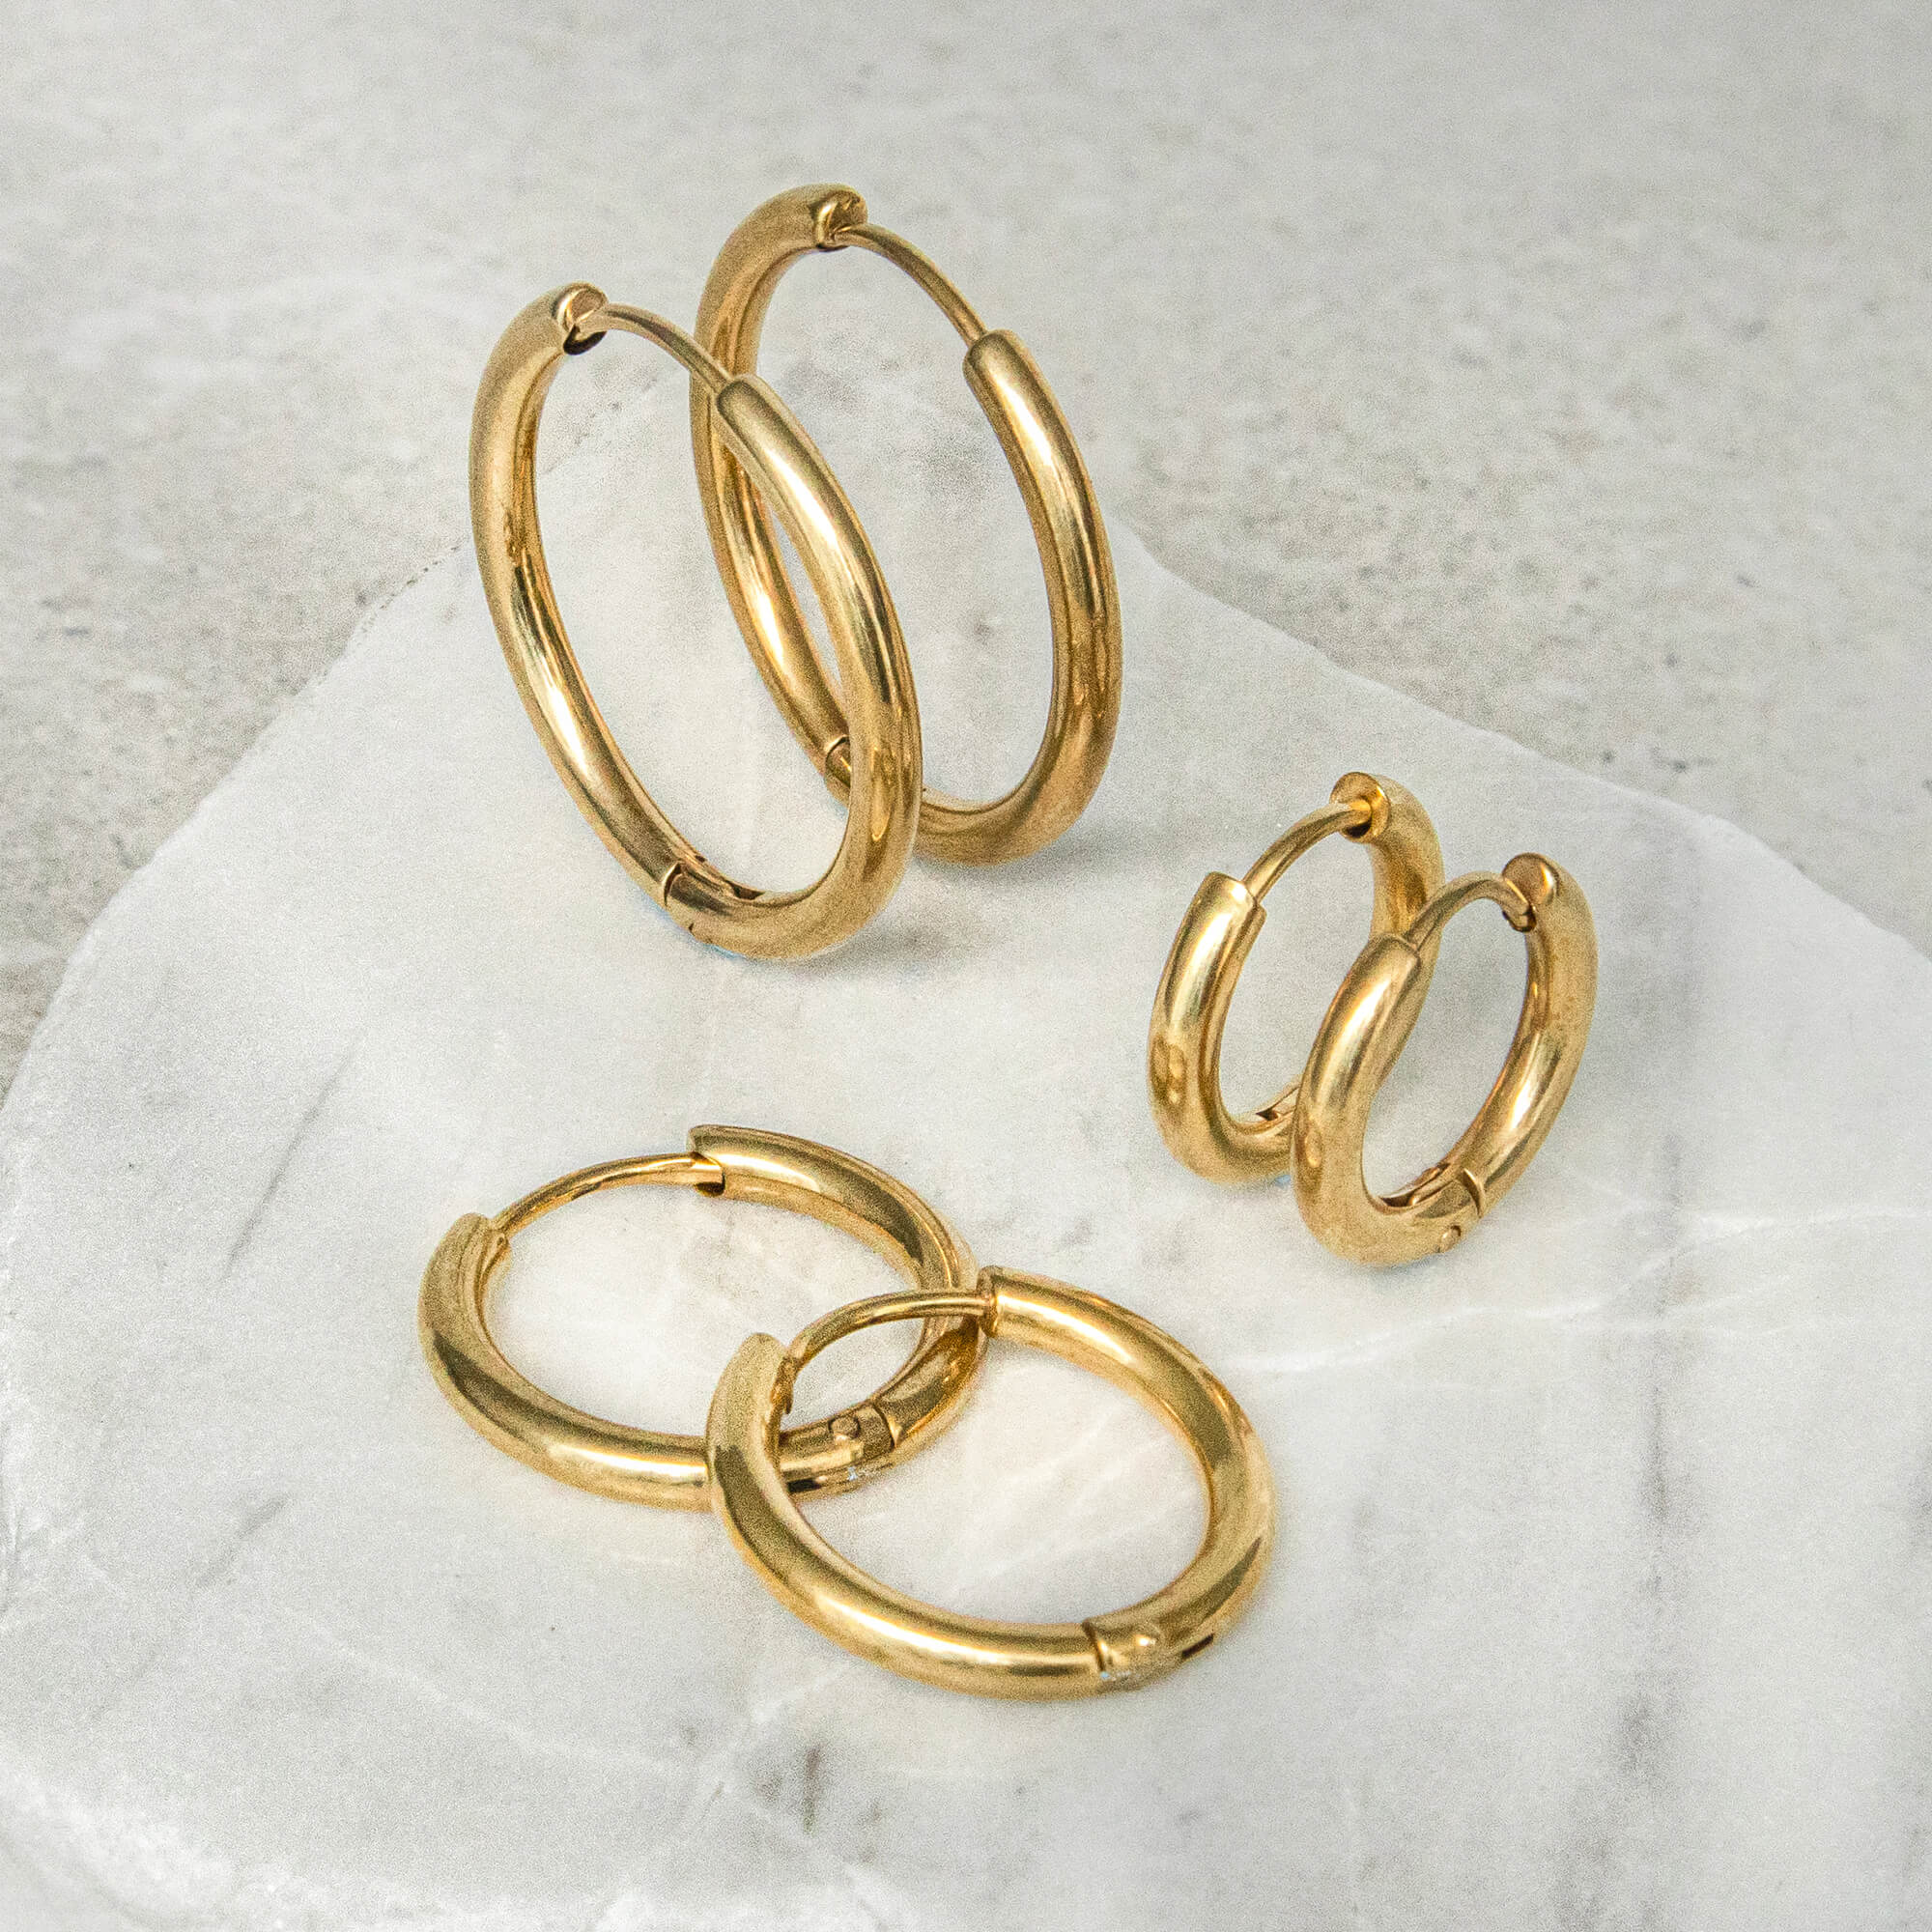 Buy 14K Yellow Gold or 14K White Gold 3/4 inch Classic Round Hoop Earrings  for Women | Real 14K Gold Earrings |Jewelry Gifts for Women, Yellow Gold,  not_applicable at Amazon.in